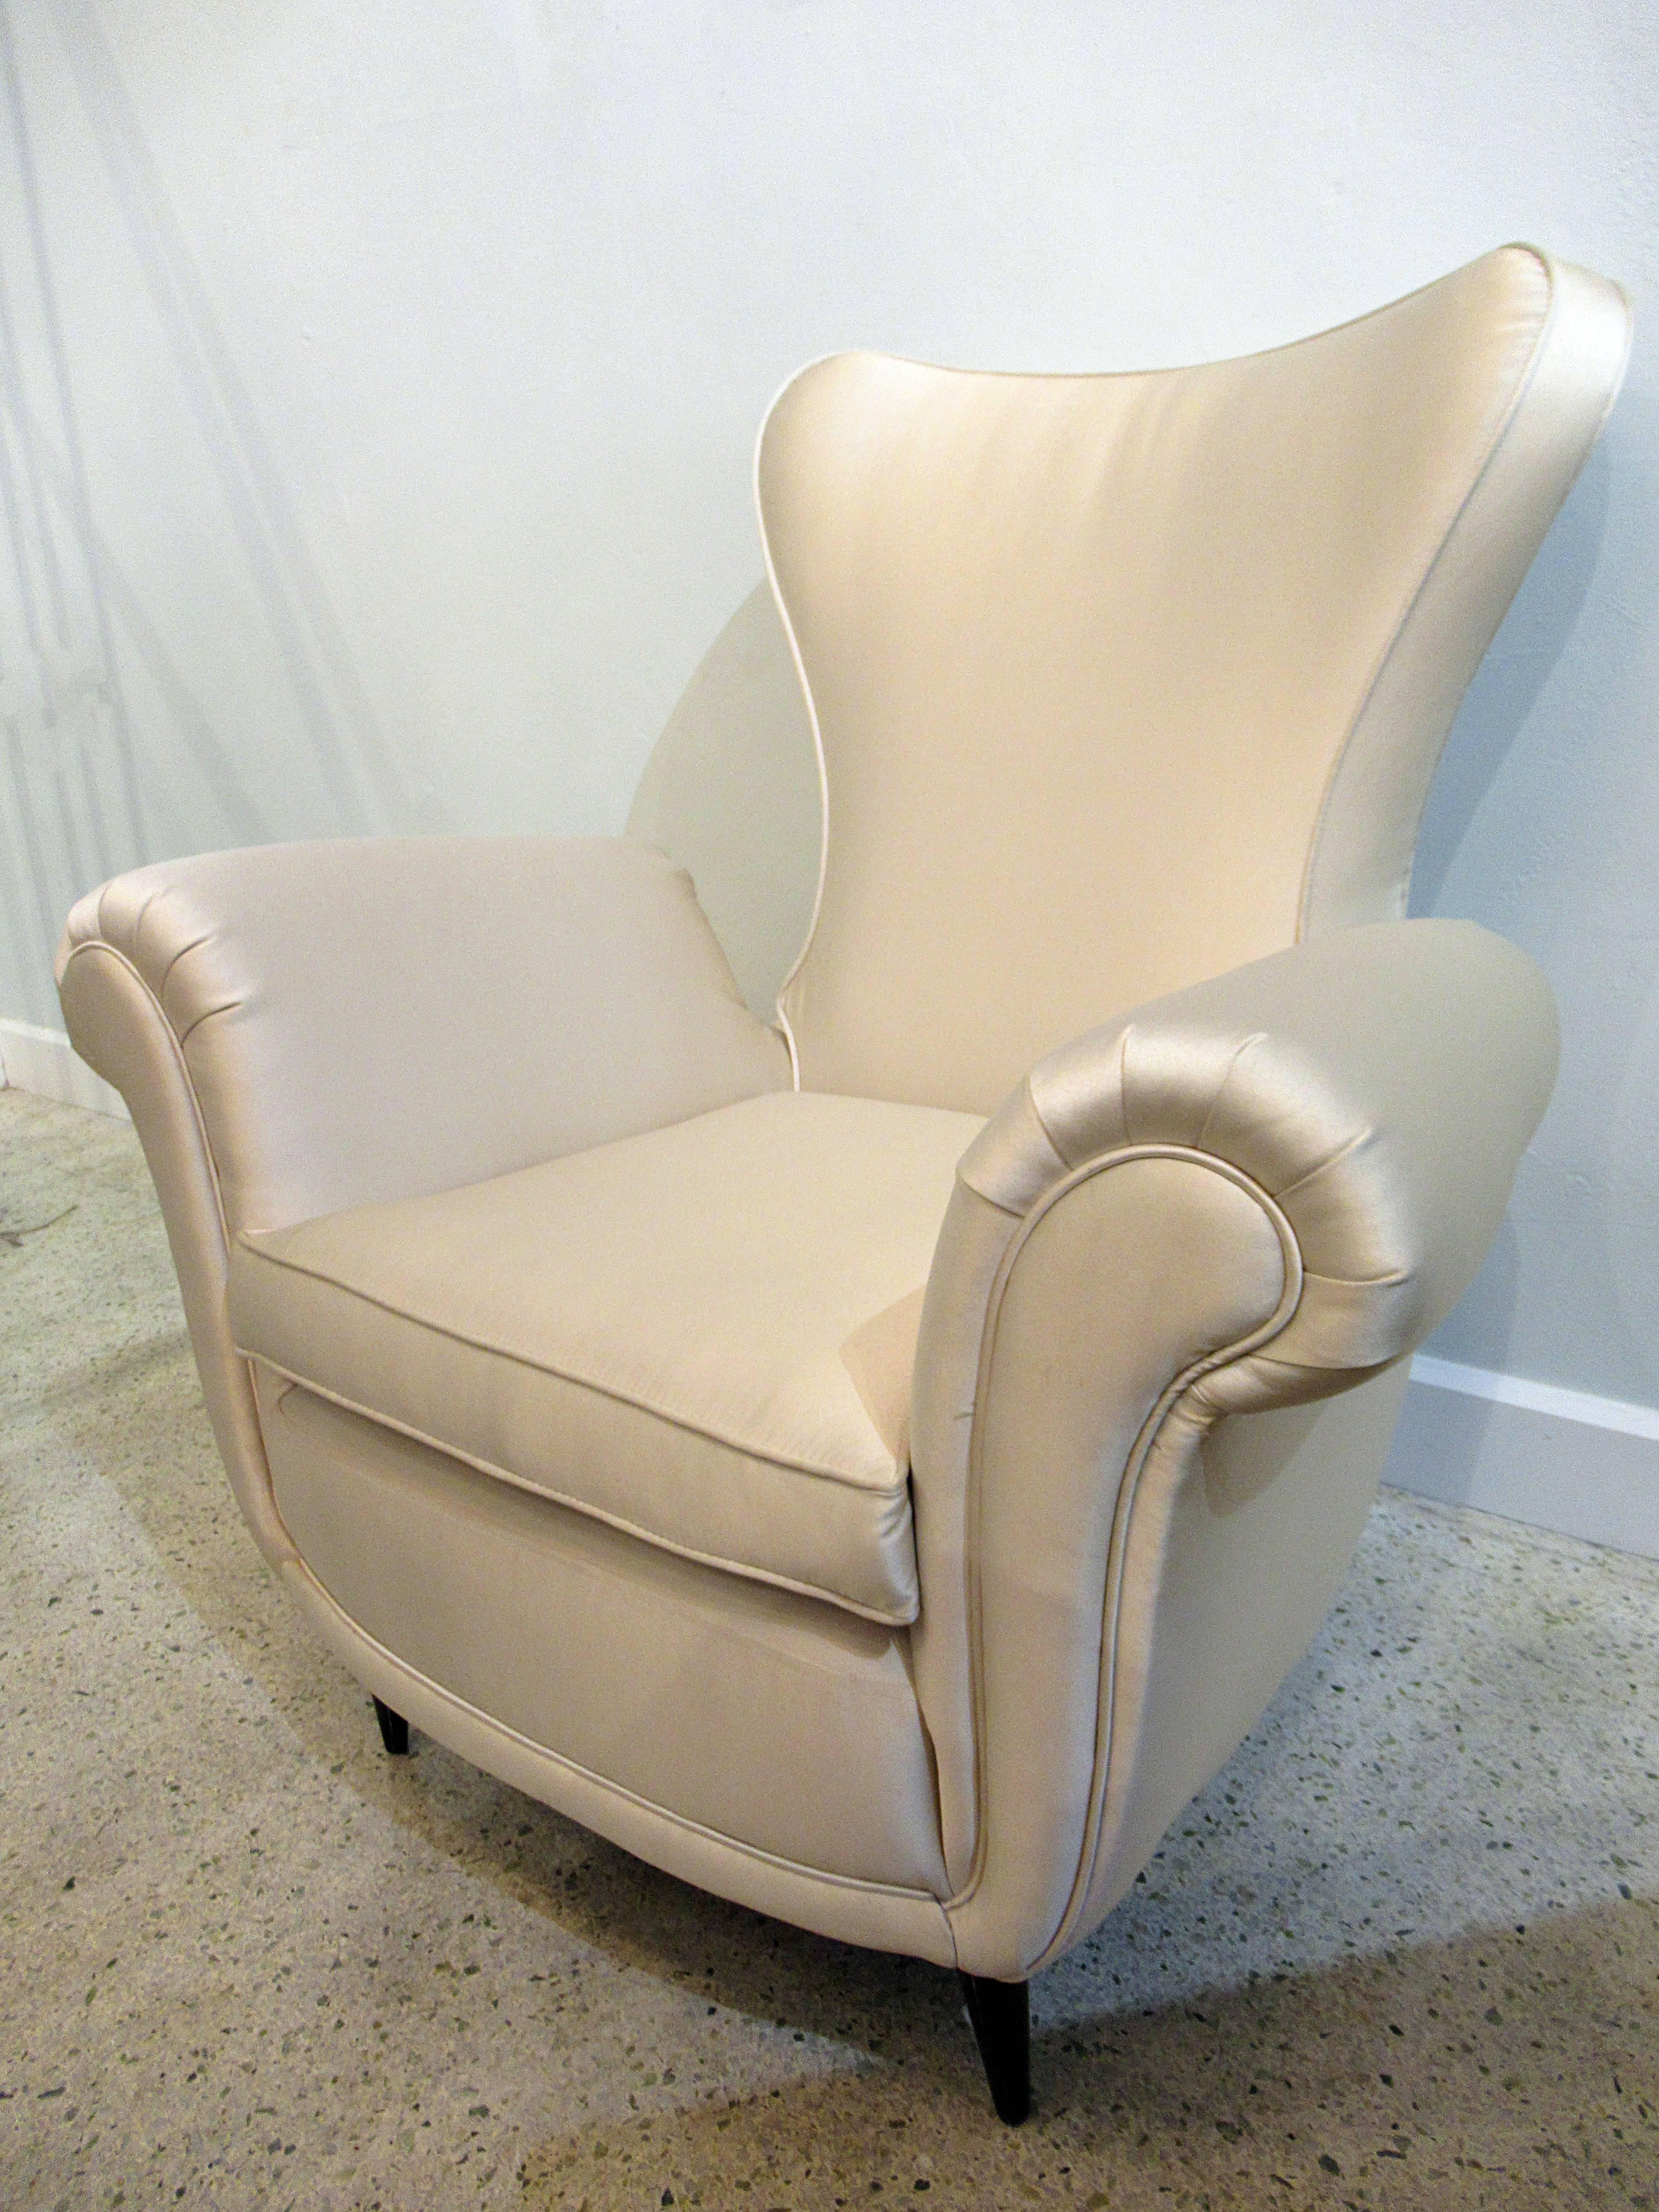 Mid-Century Modern Italian Modern Upholstered Scrolled Arm Occasional Chair, Paolo Buffa, 1950's For Sale